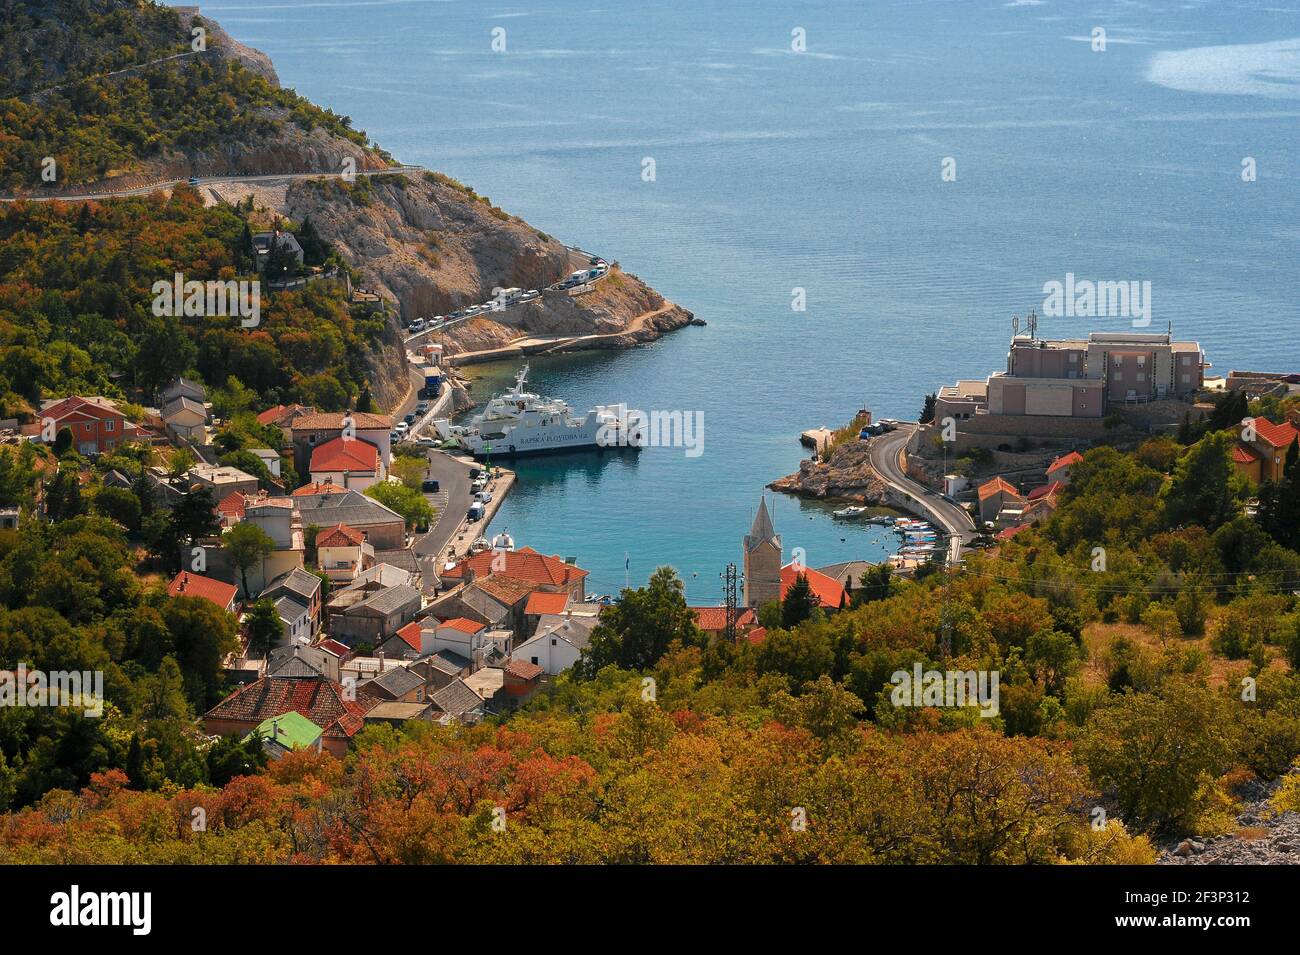 Lower slopes of the 1,757 m / 5,764 ft Velebit mountain range glow with vibrant early autumn oranges and yellow-greens as tourist cars, caravans and motorhomes queue on the narrow corniche road winding down to the tiny Adriatic harbour at Jablanac, Lika-Senj County, western Croatia, to board a ferry for the short voyage to the offshore island of Rab.  This image was captured prior to 2012, when the Rapska Plovidba ferry service moved from Jablanac to the ferry port at Stinica, a short distance up the mainland coast. Stock Photo